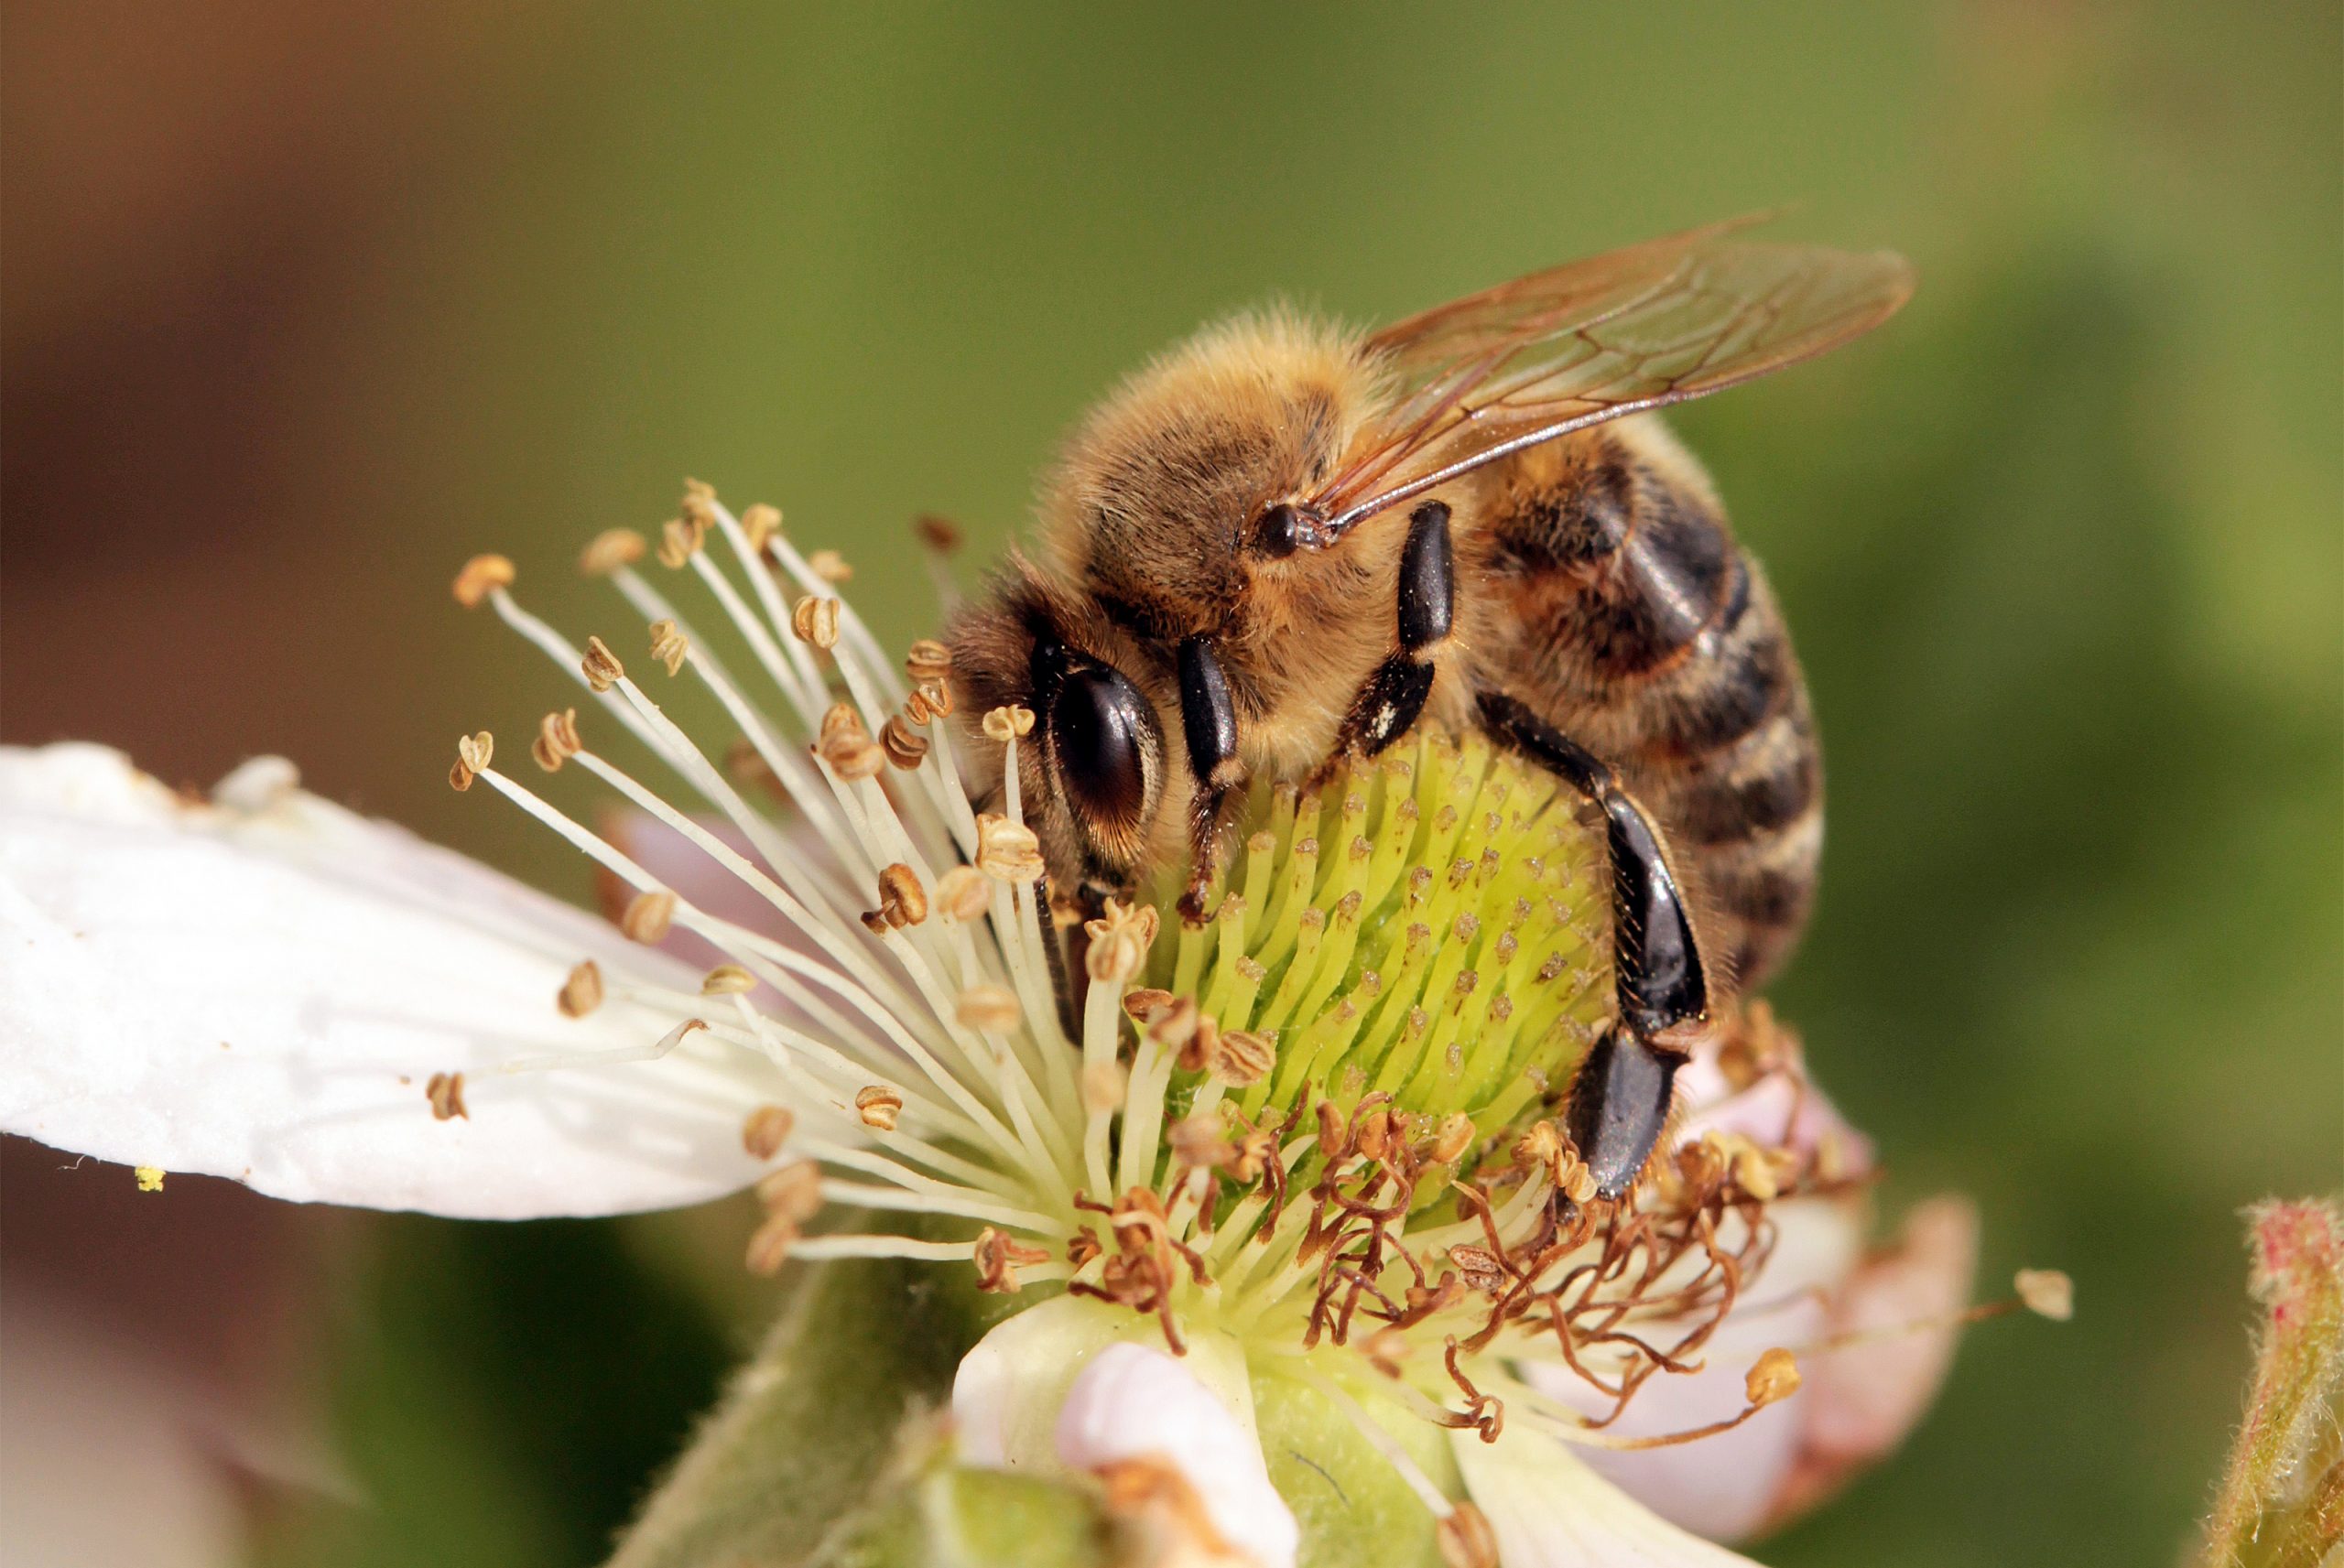 USDA to Open New Honey Bee Research Facility